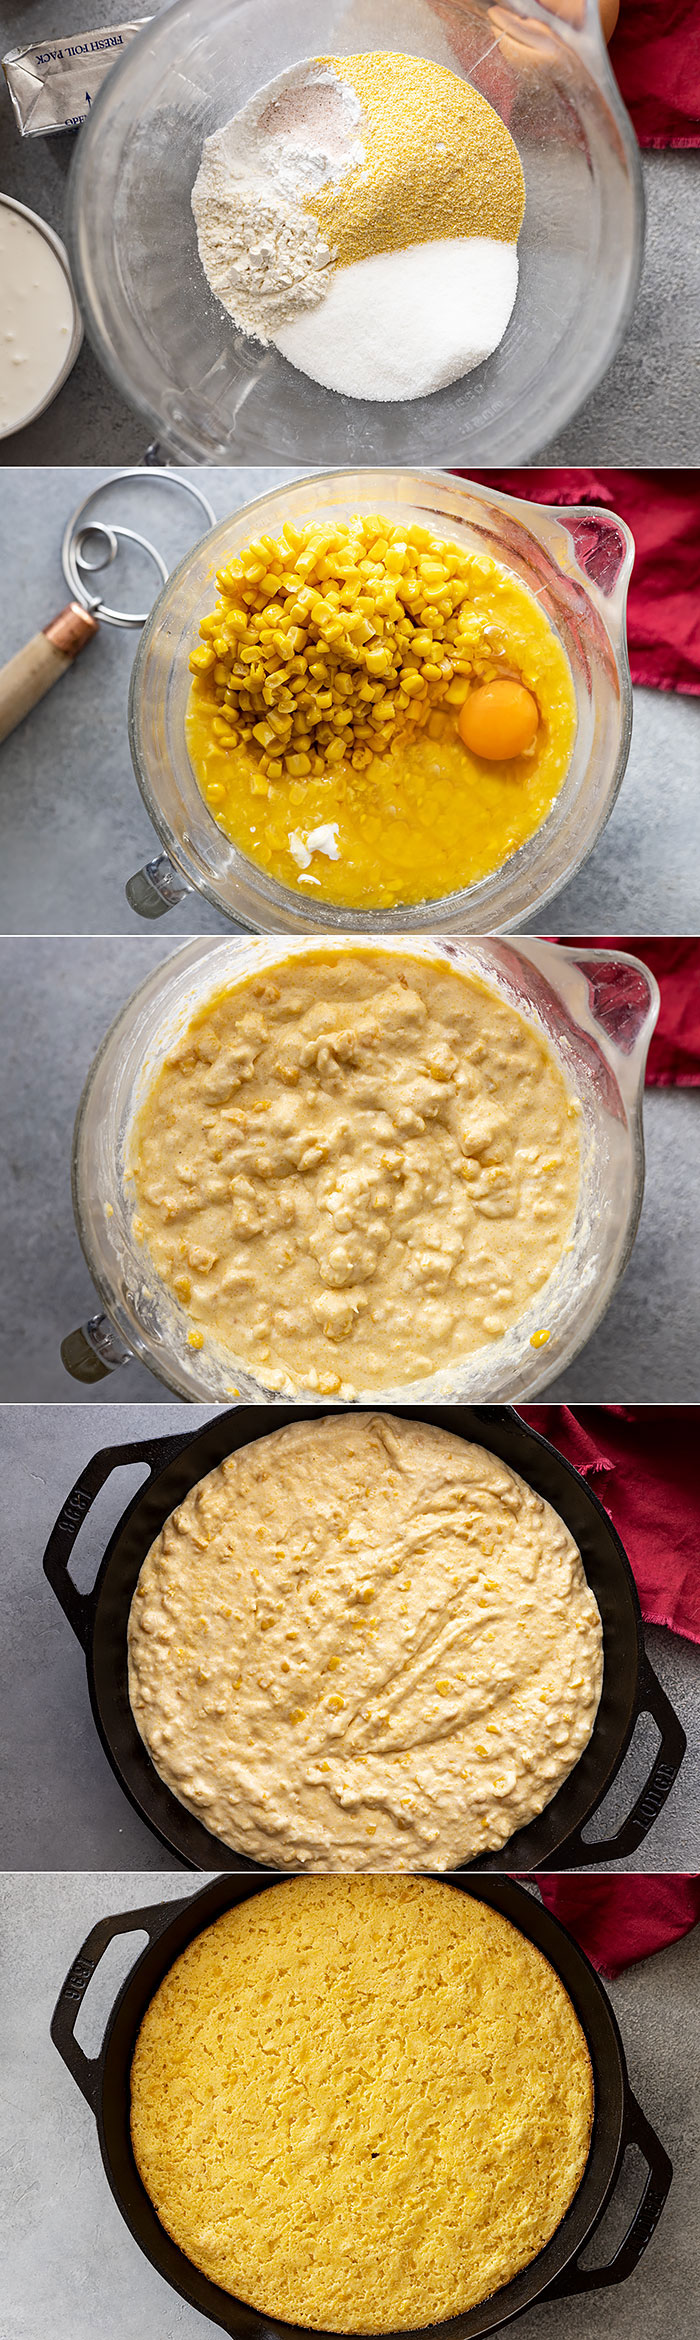 Five pictures showing how to make corn casserole.